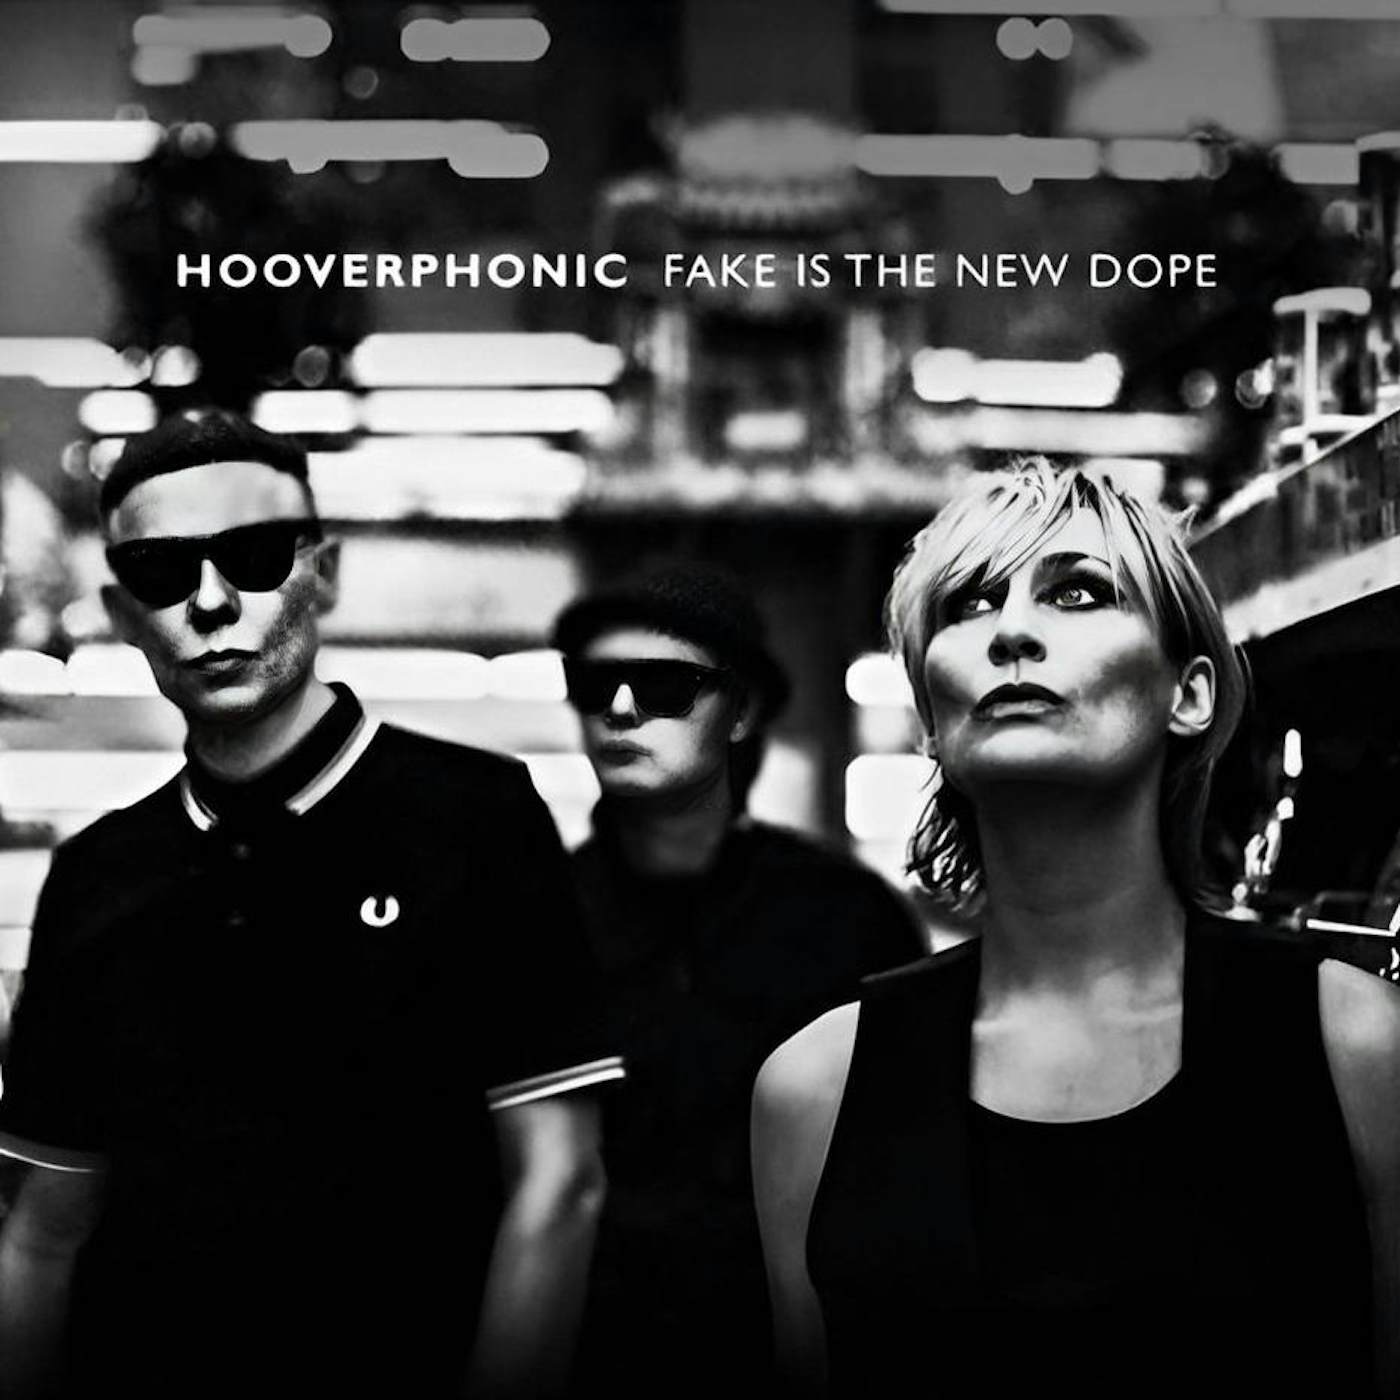 Hooverphonic Fake Is The New Dope (Clear) Vinyl Record